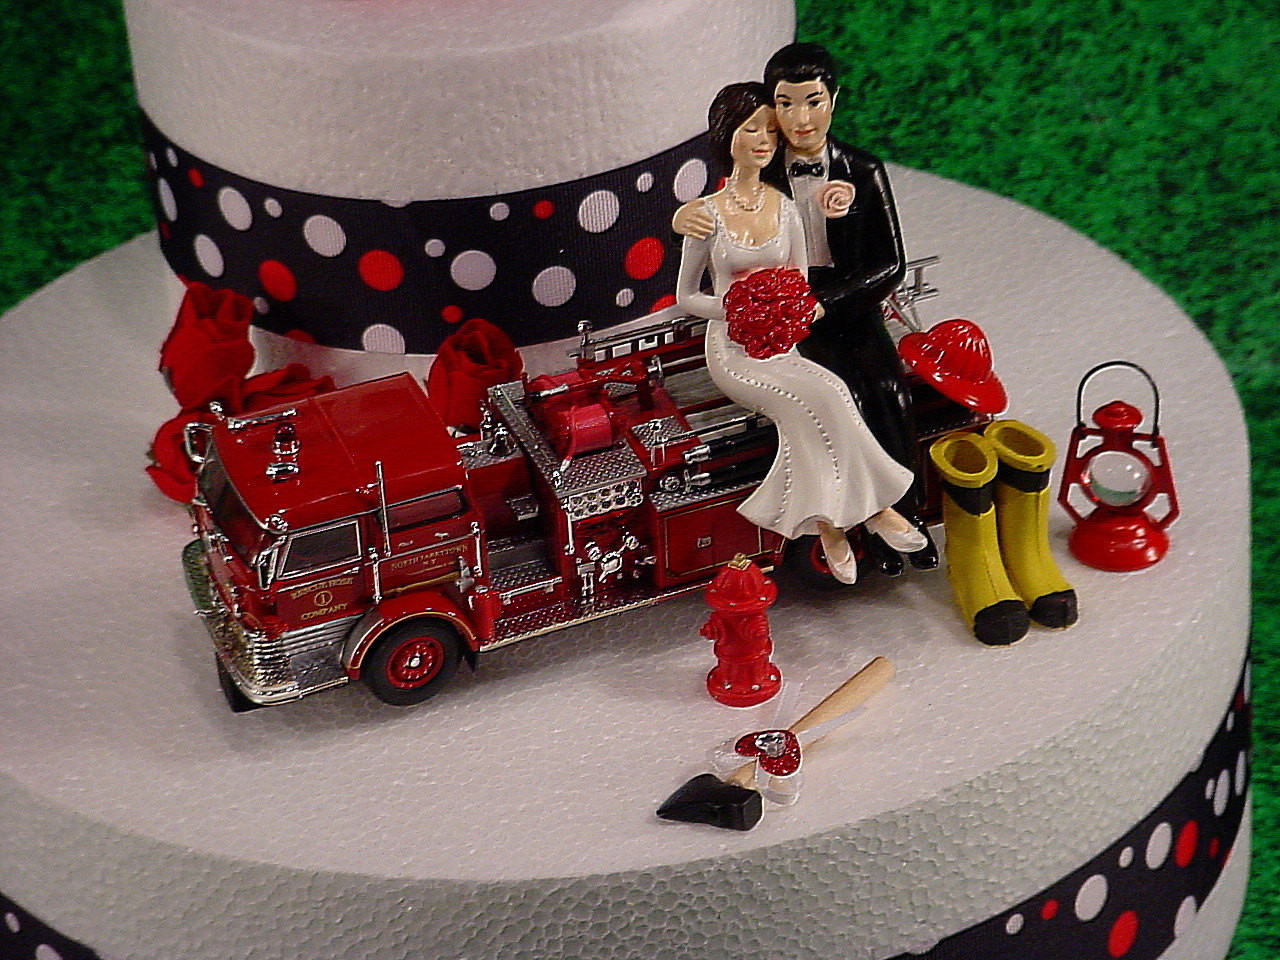 Firefighter Wedding Cake
 NO Fire Bride and Groom Firefighter Wedding Cake Topper Custom